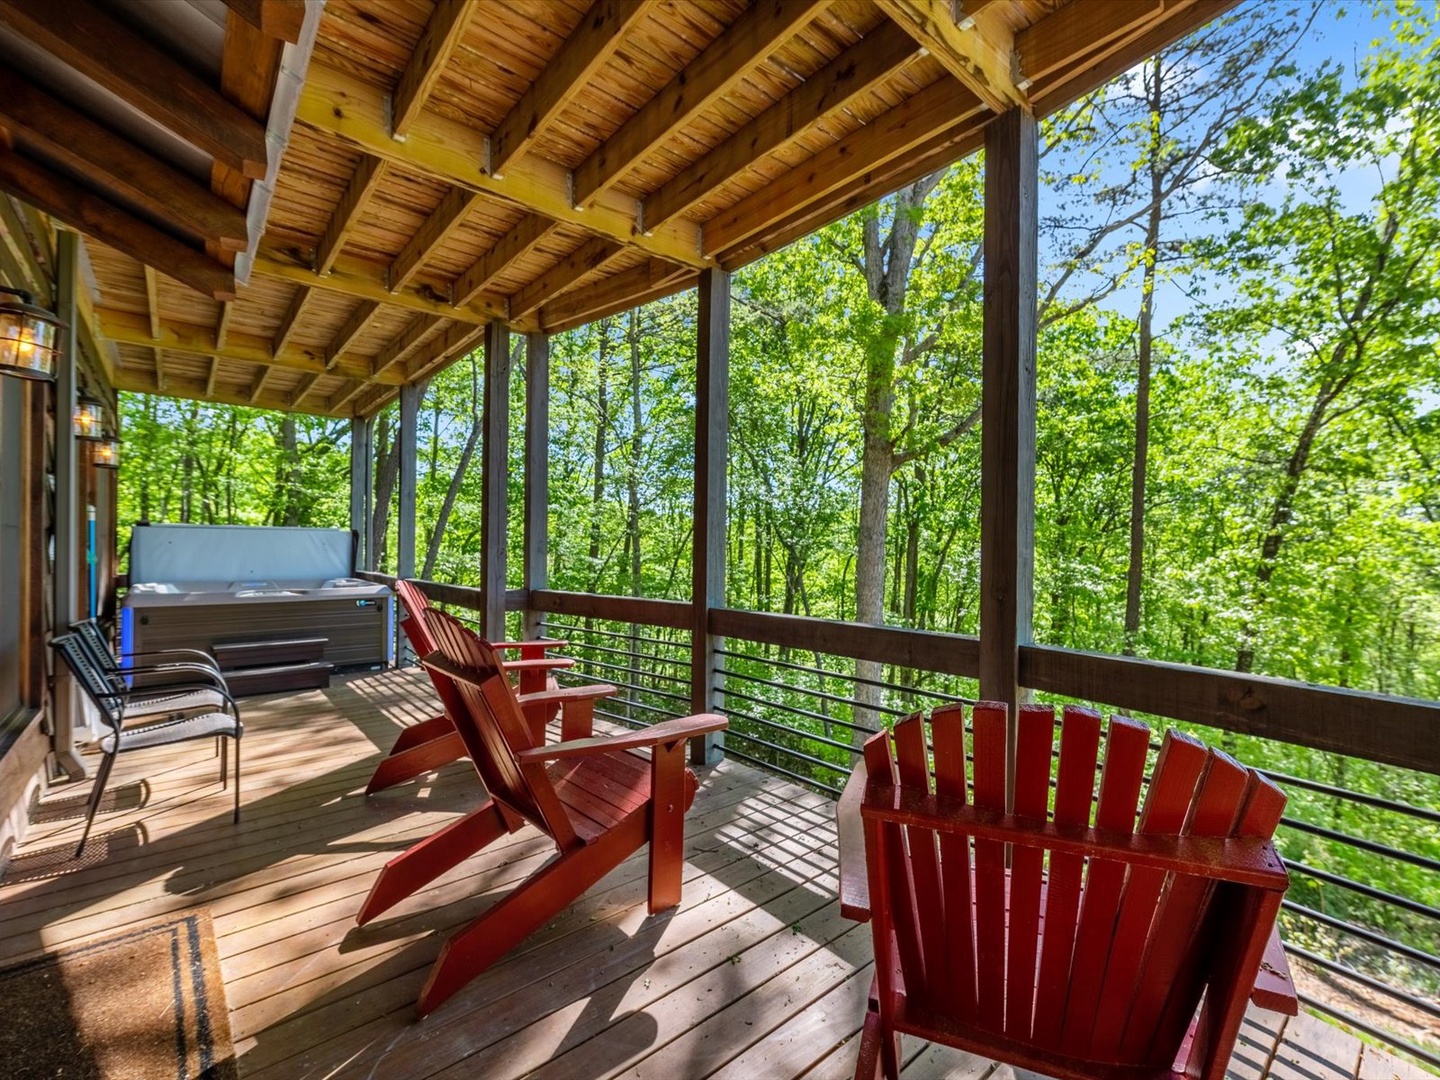 MMountain Breeze - Comfortable Deck Seating